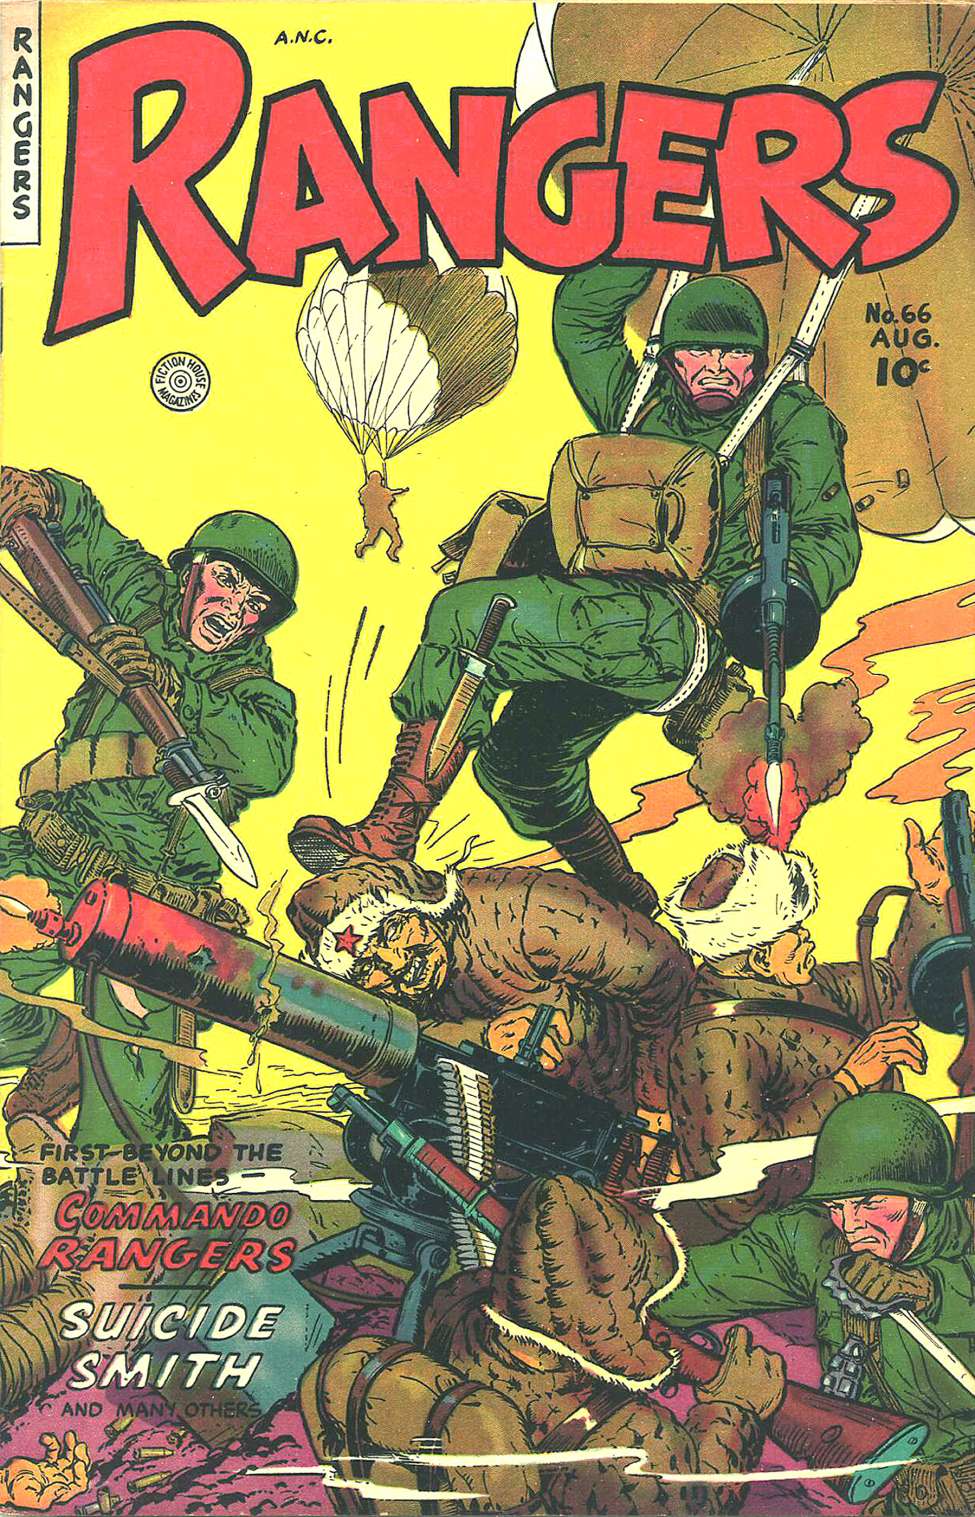 Comic Book Cover For Rangers Comics 66 - Version 2